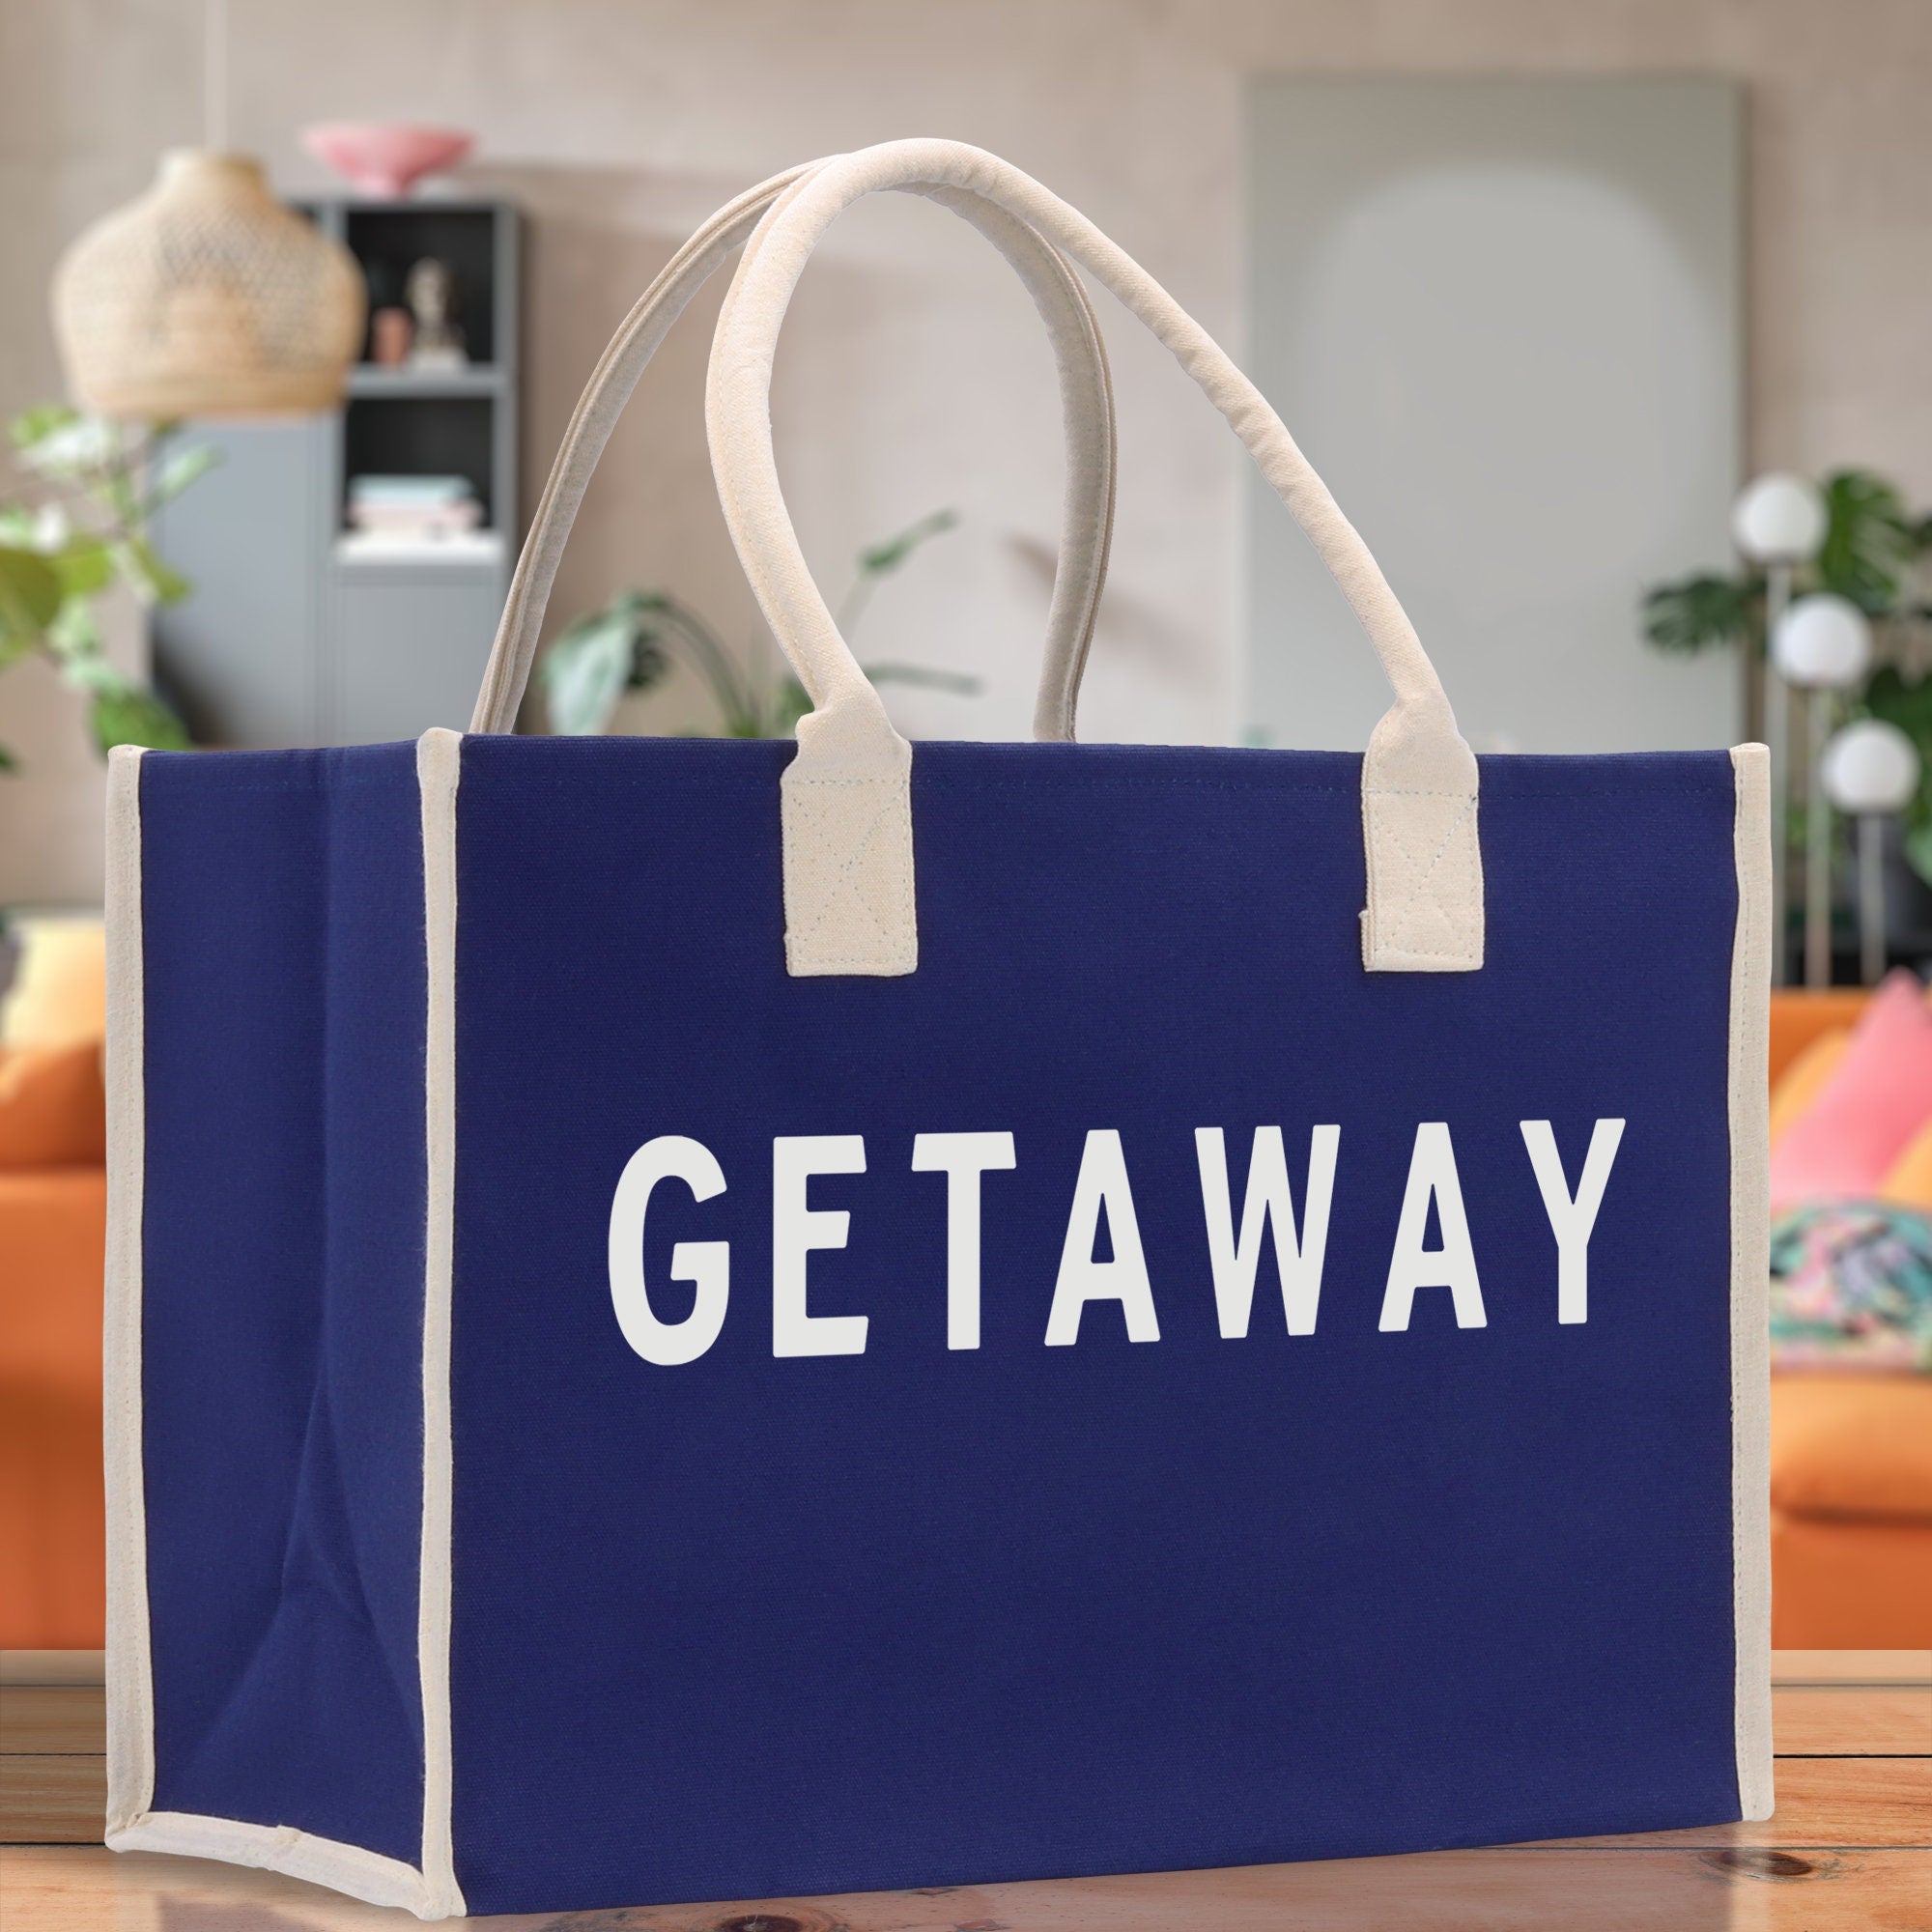 Getaway Cotton Canvas Chic Beach Tote Bag Multipurpose Tote Weekender Tote Gift for Her Outdoor Tote Vacation Tote Large Beach Bag